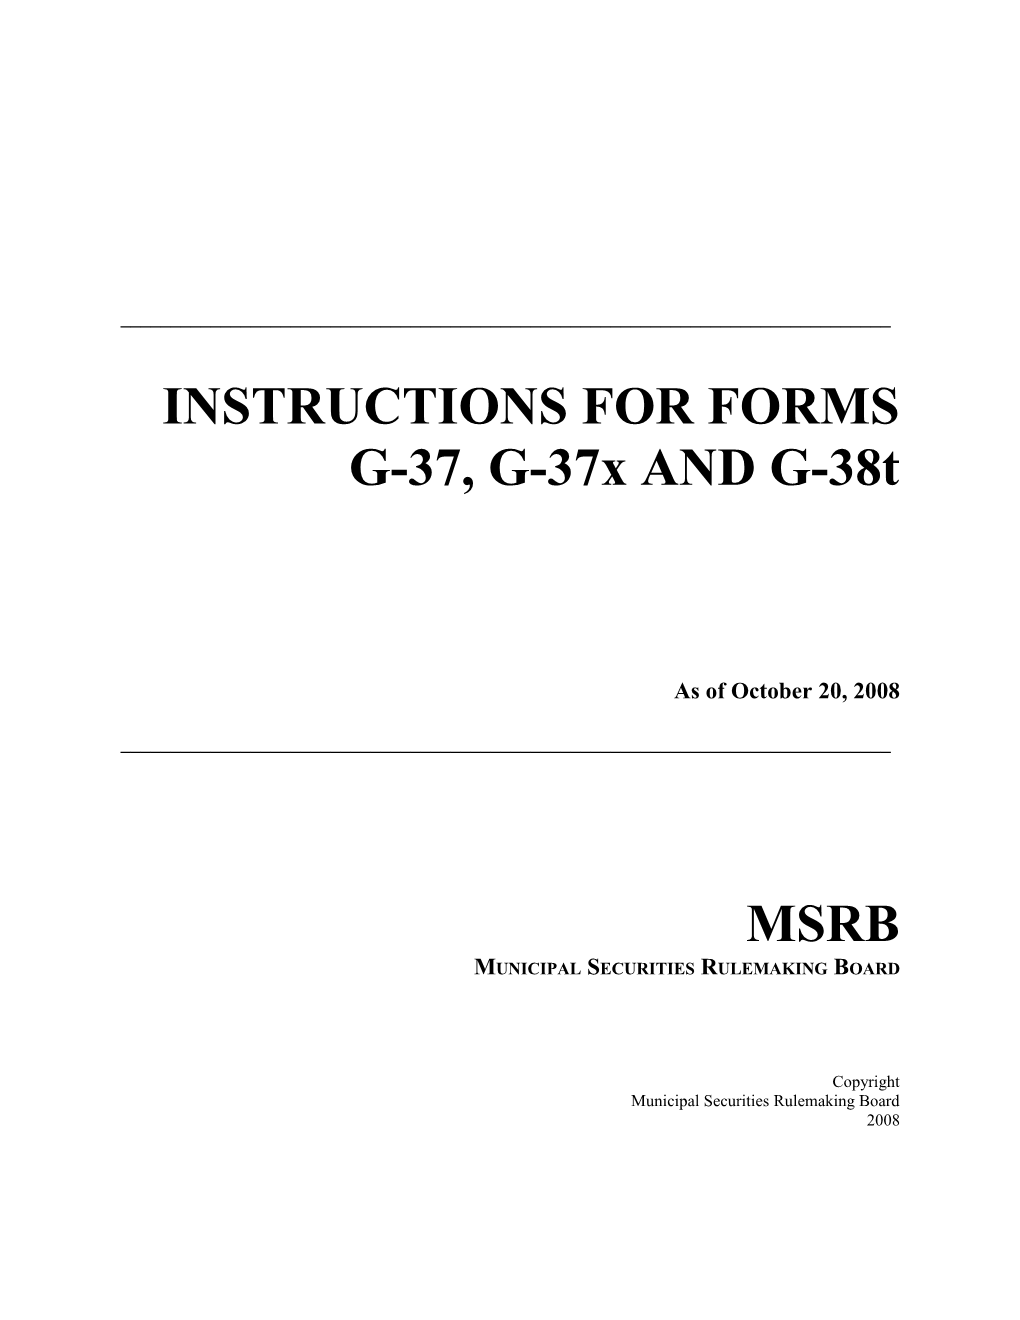 INSTRUCTIONS for FORMS G-37, G-37X and G-38T